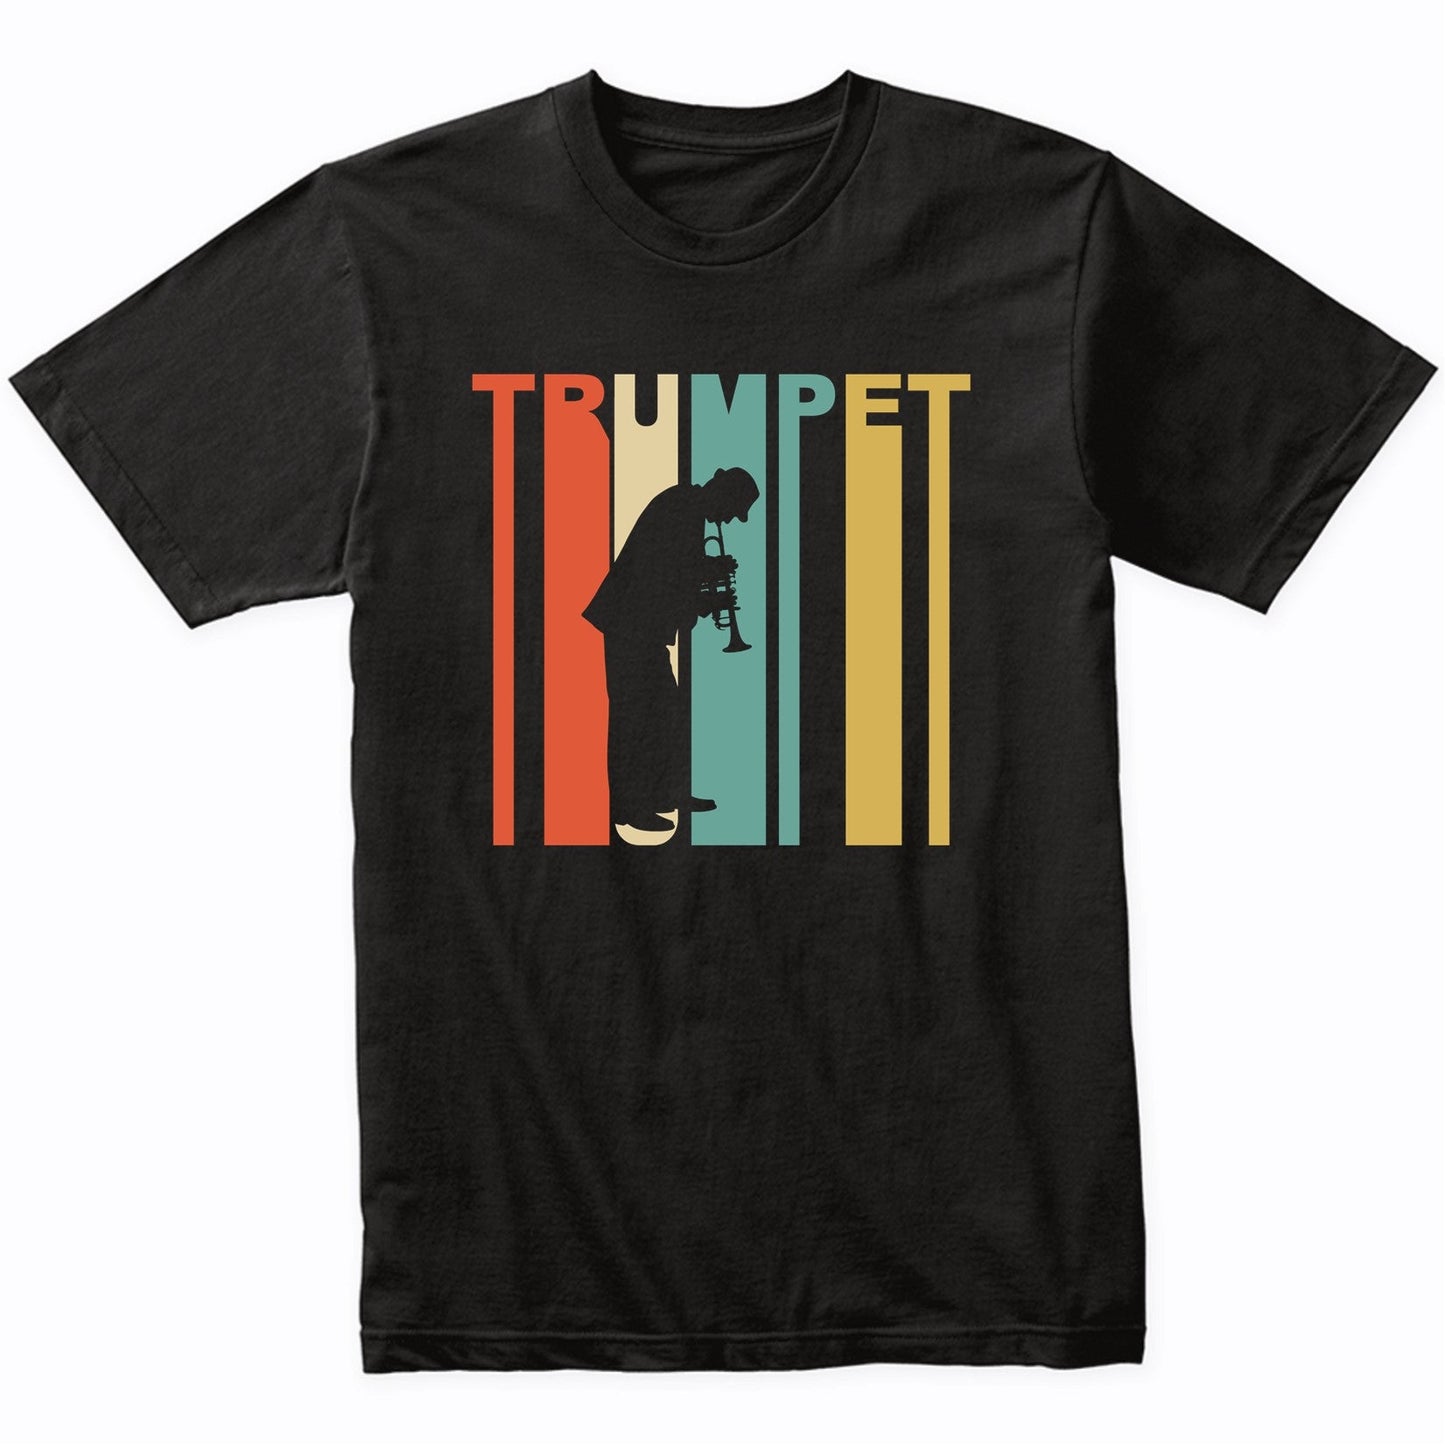 Retro 1970's Style Trumpet Player Silhouette Music T-Shirt